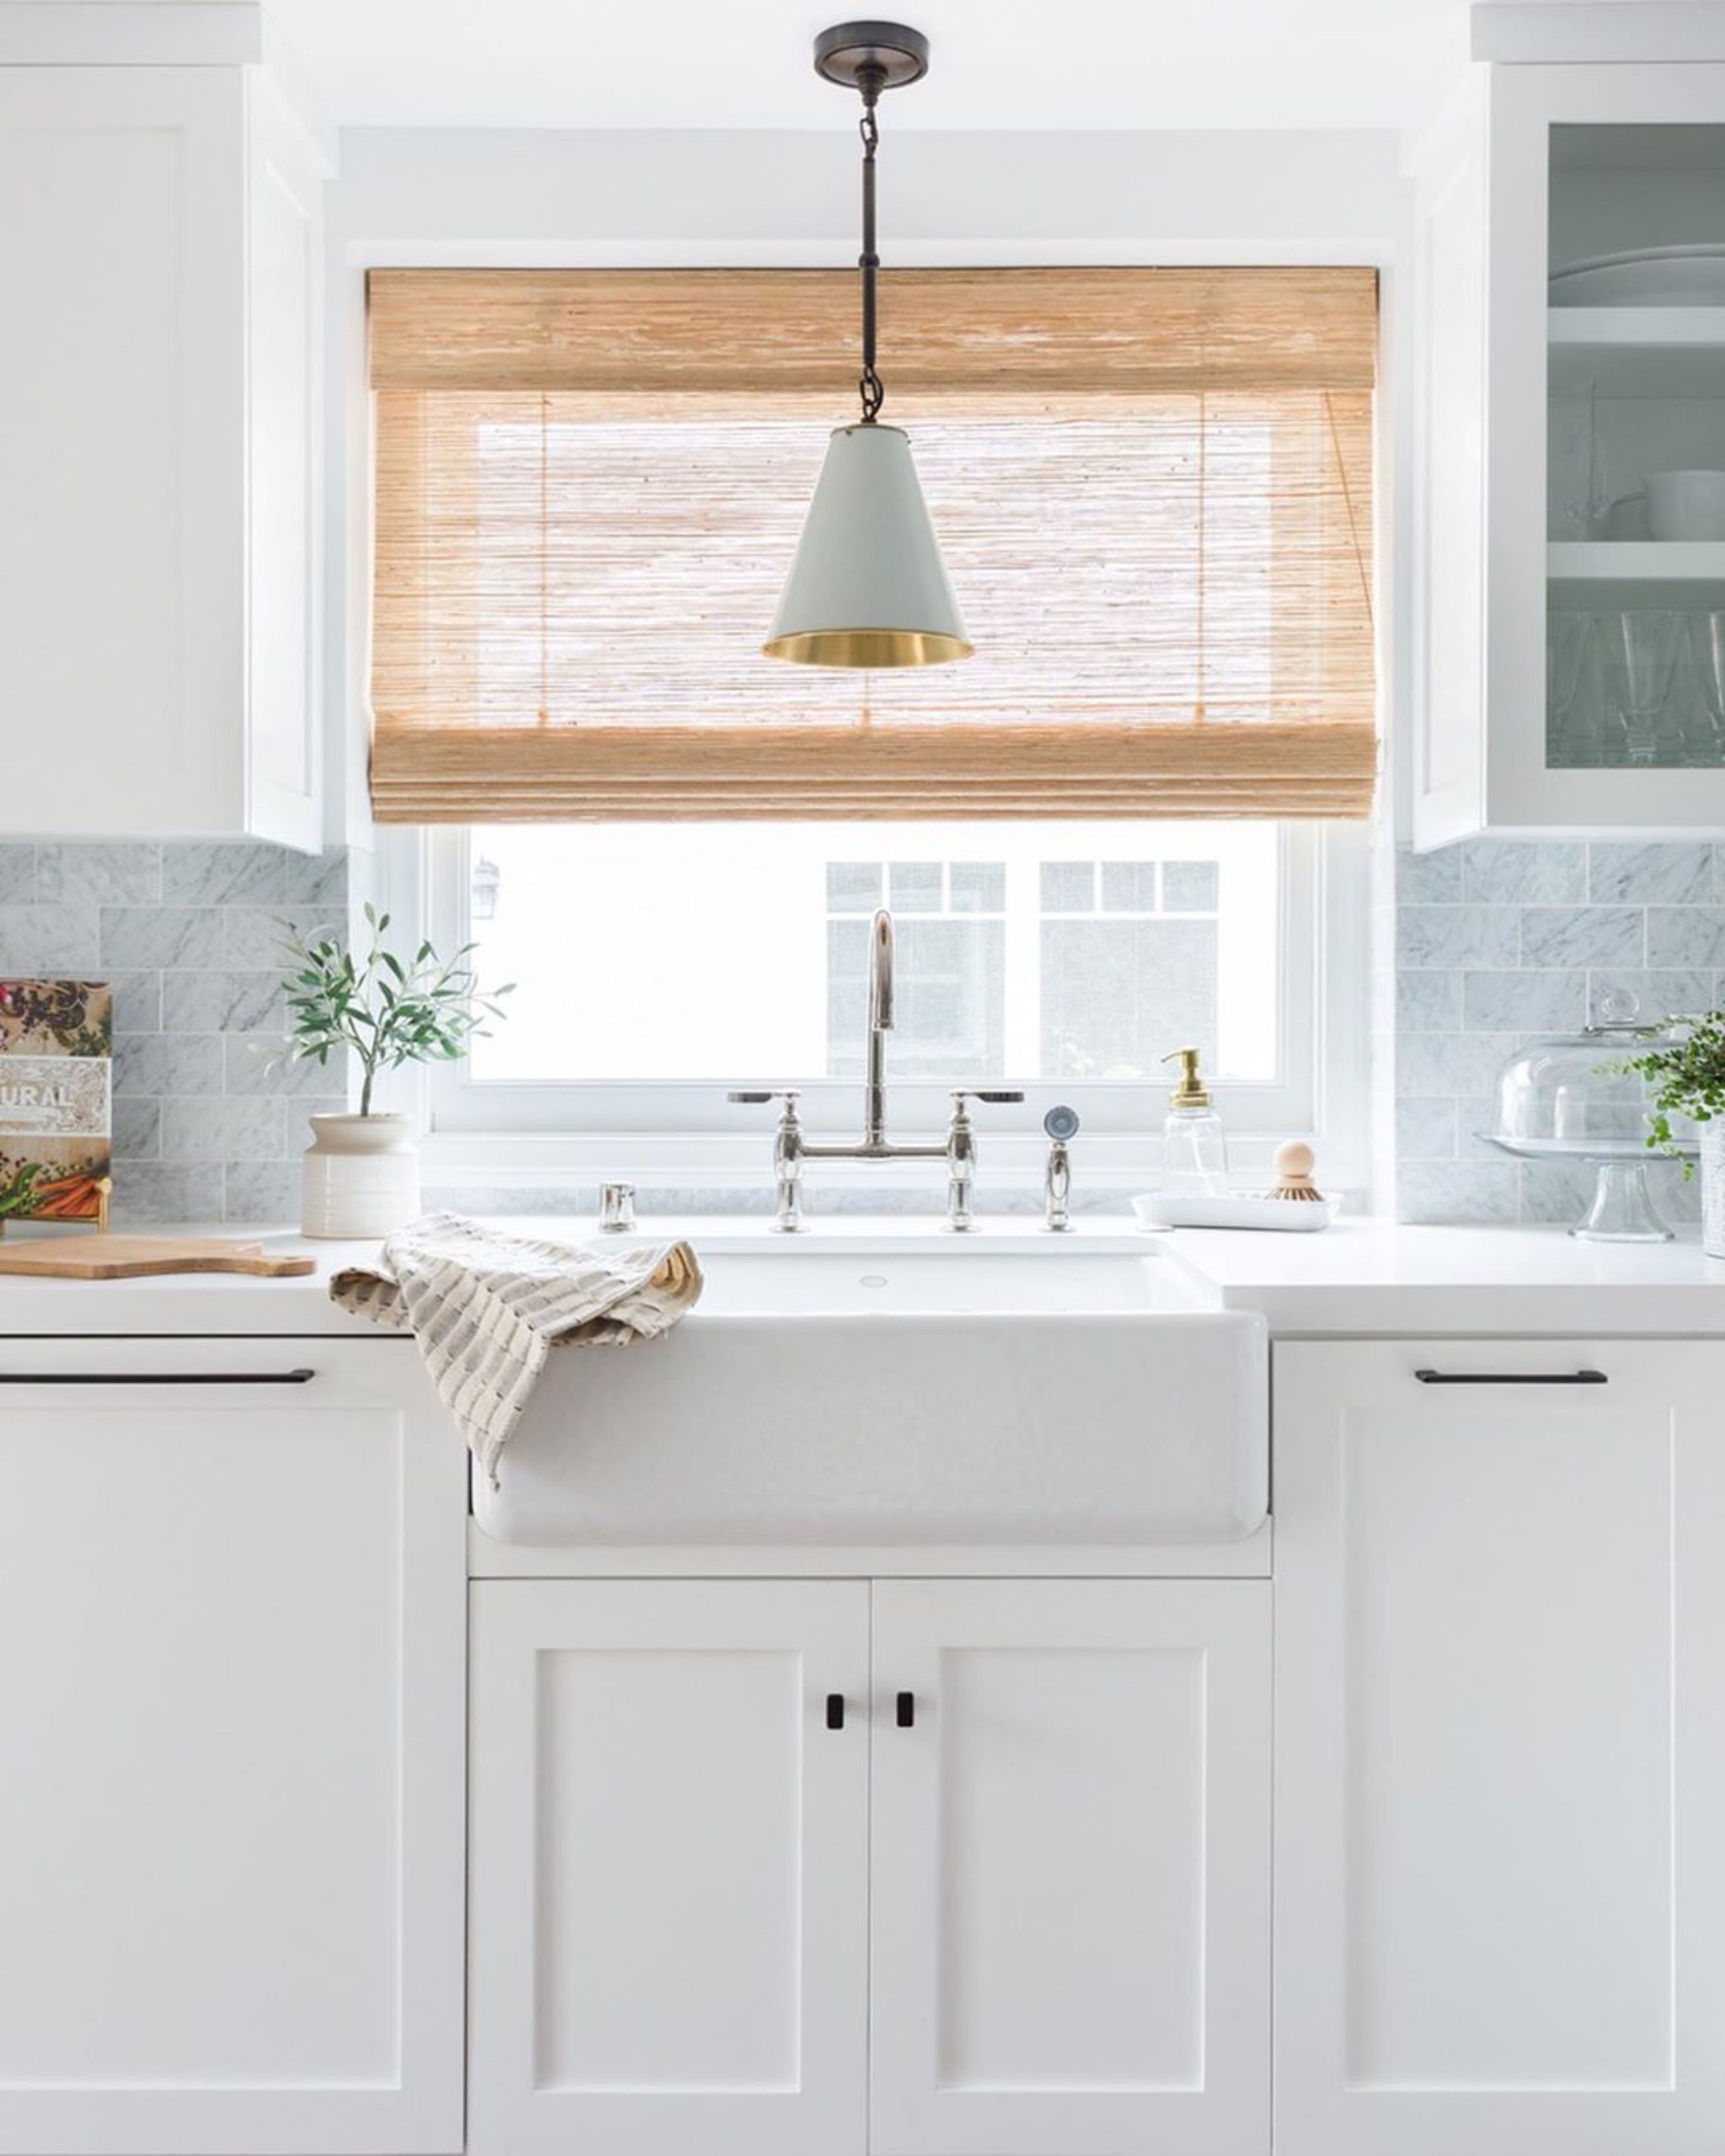 Woven Wood Shade for Kitchen Windows